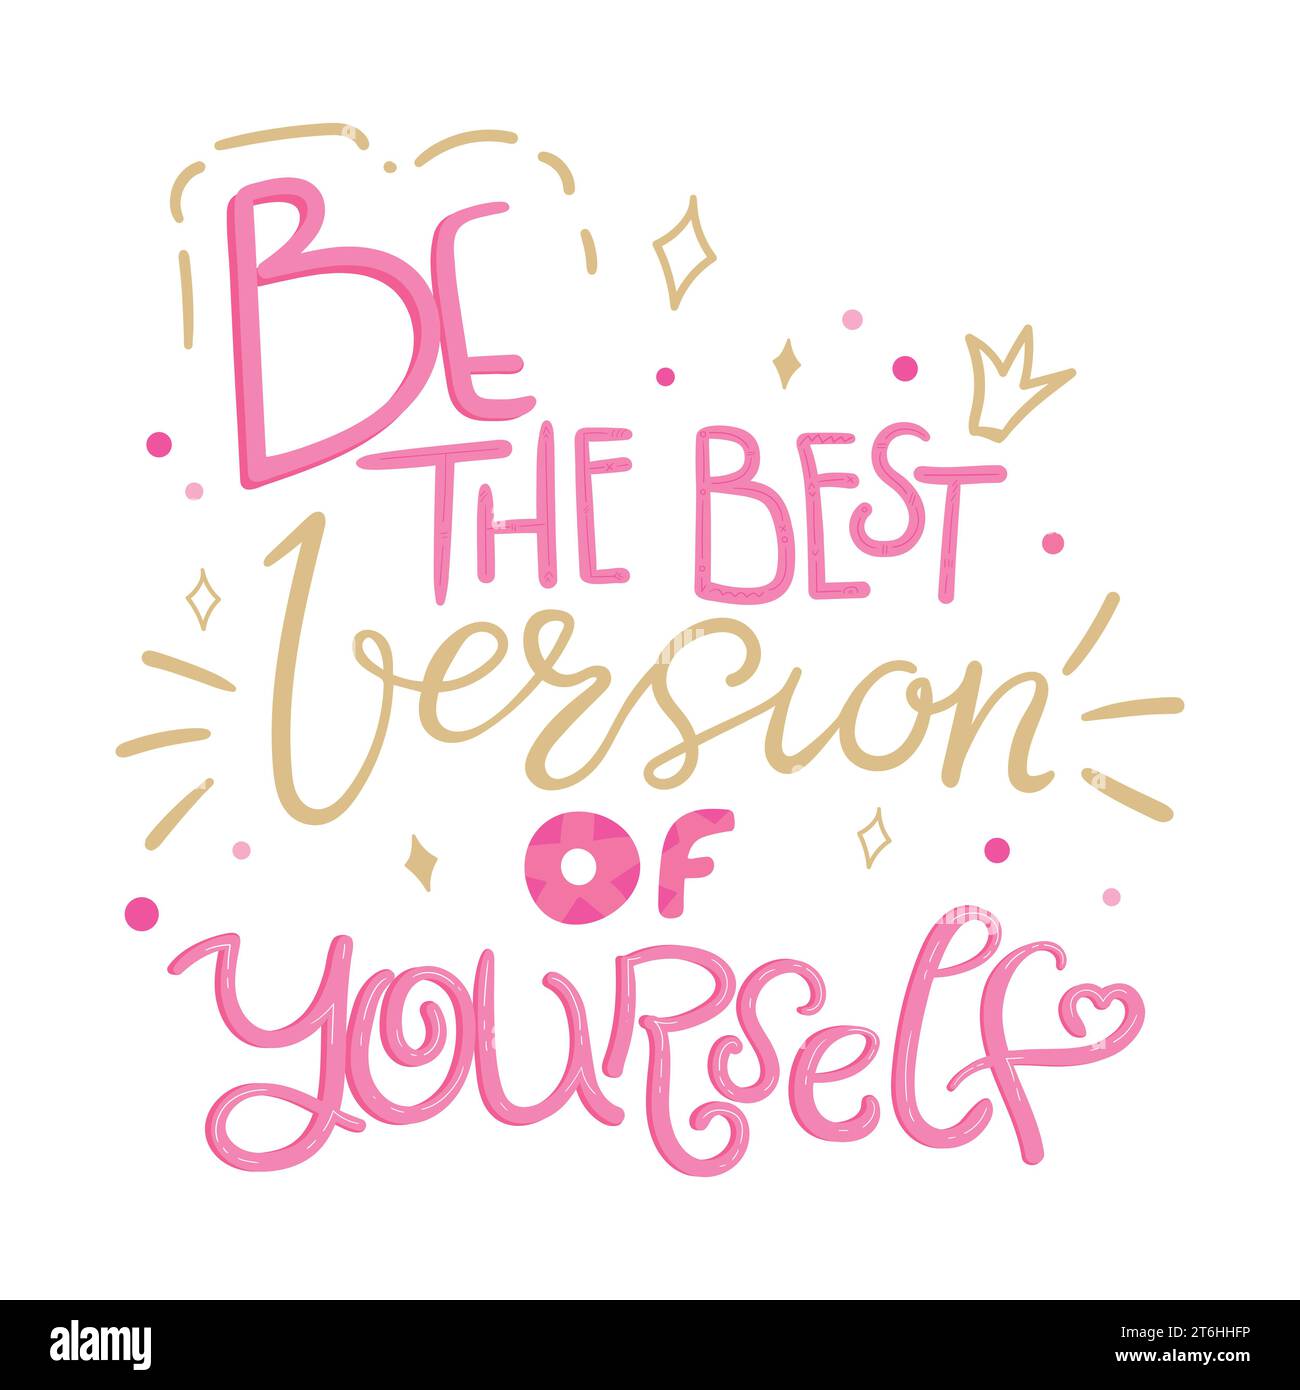 Be the best version of yourself quote. Hand drawn motivational phrase. Vector illustration Stock Vector